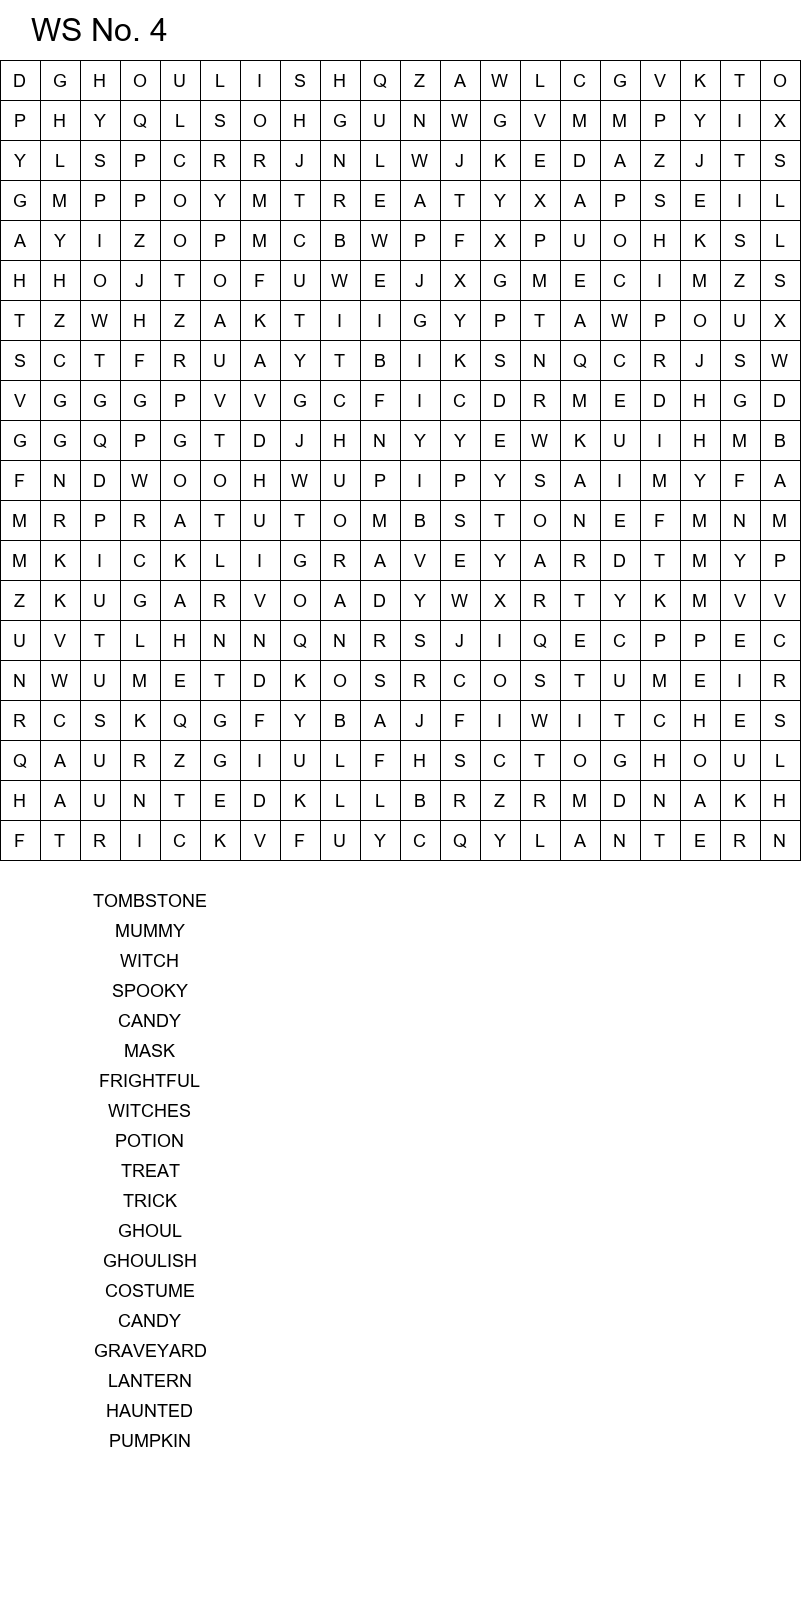 Challenging Halloween word search for teens size 20x20 No 4